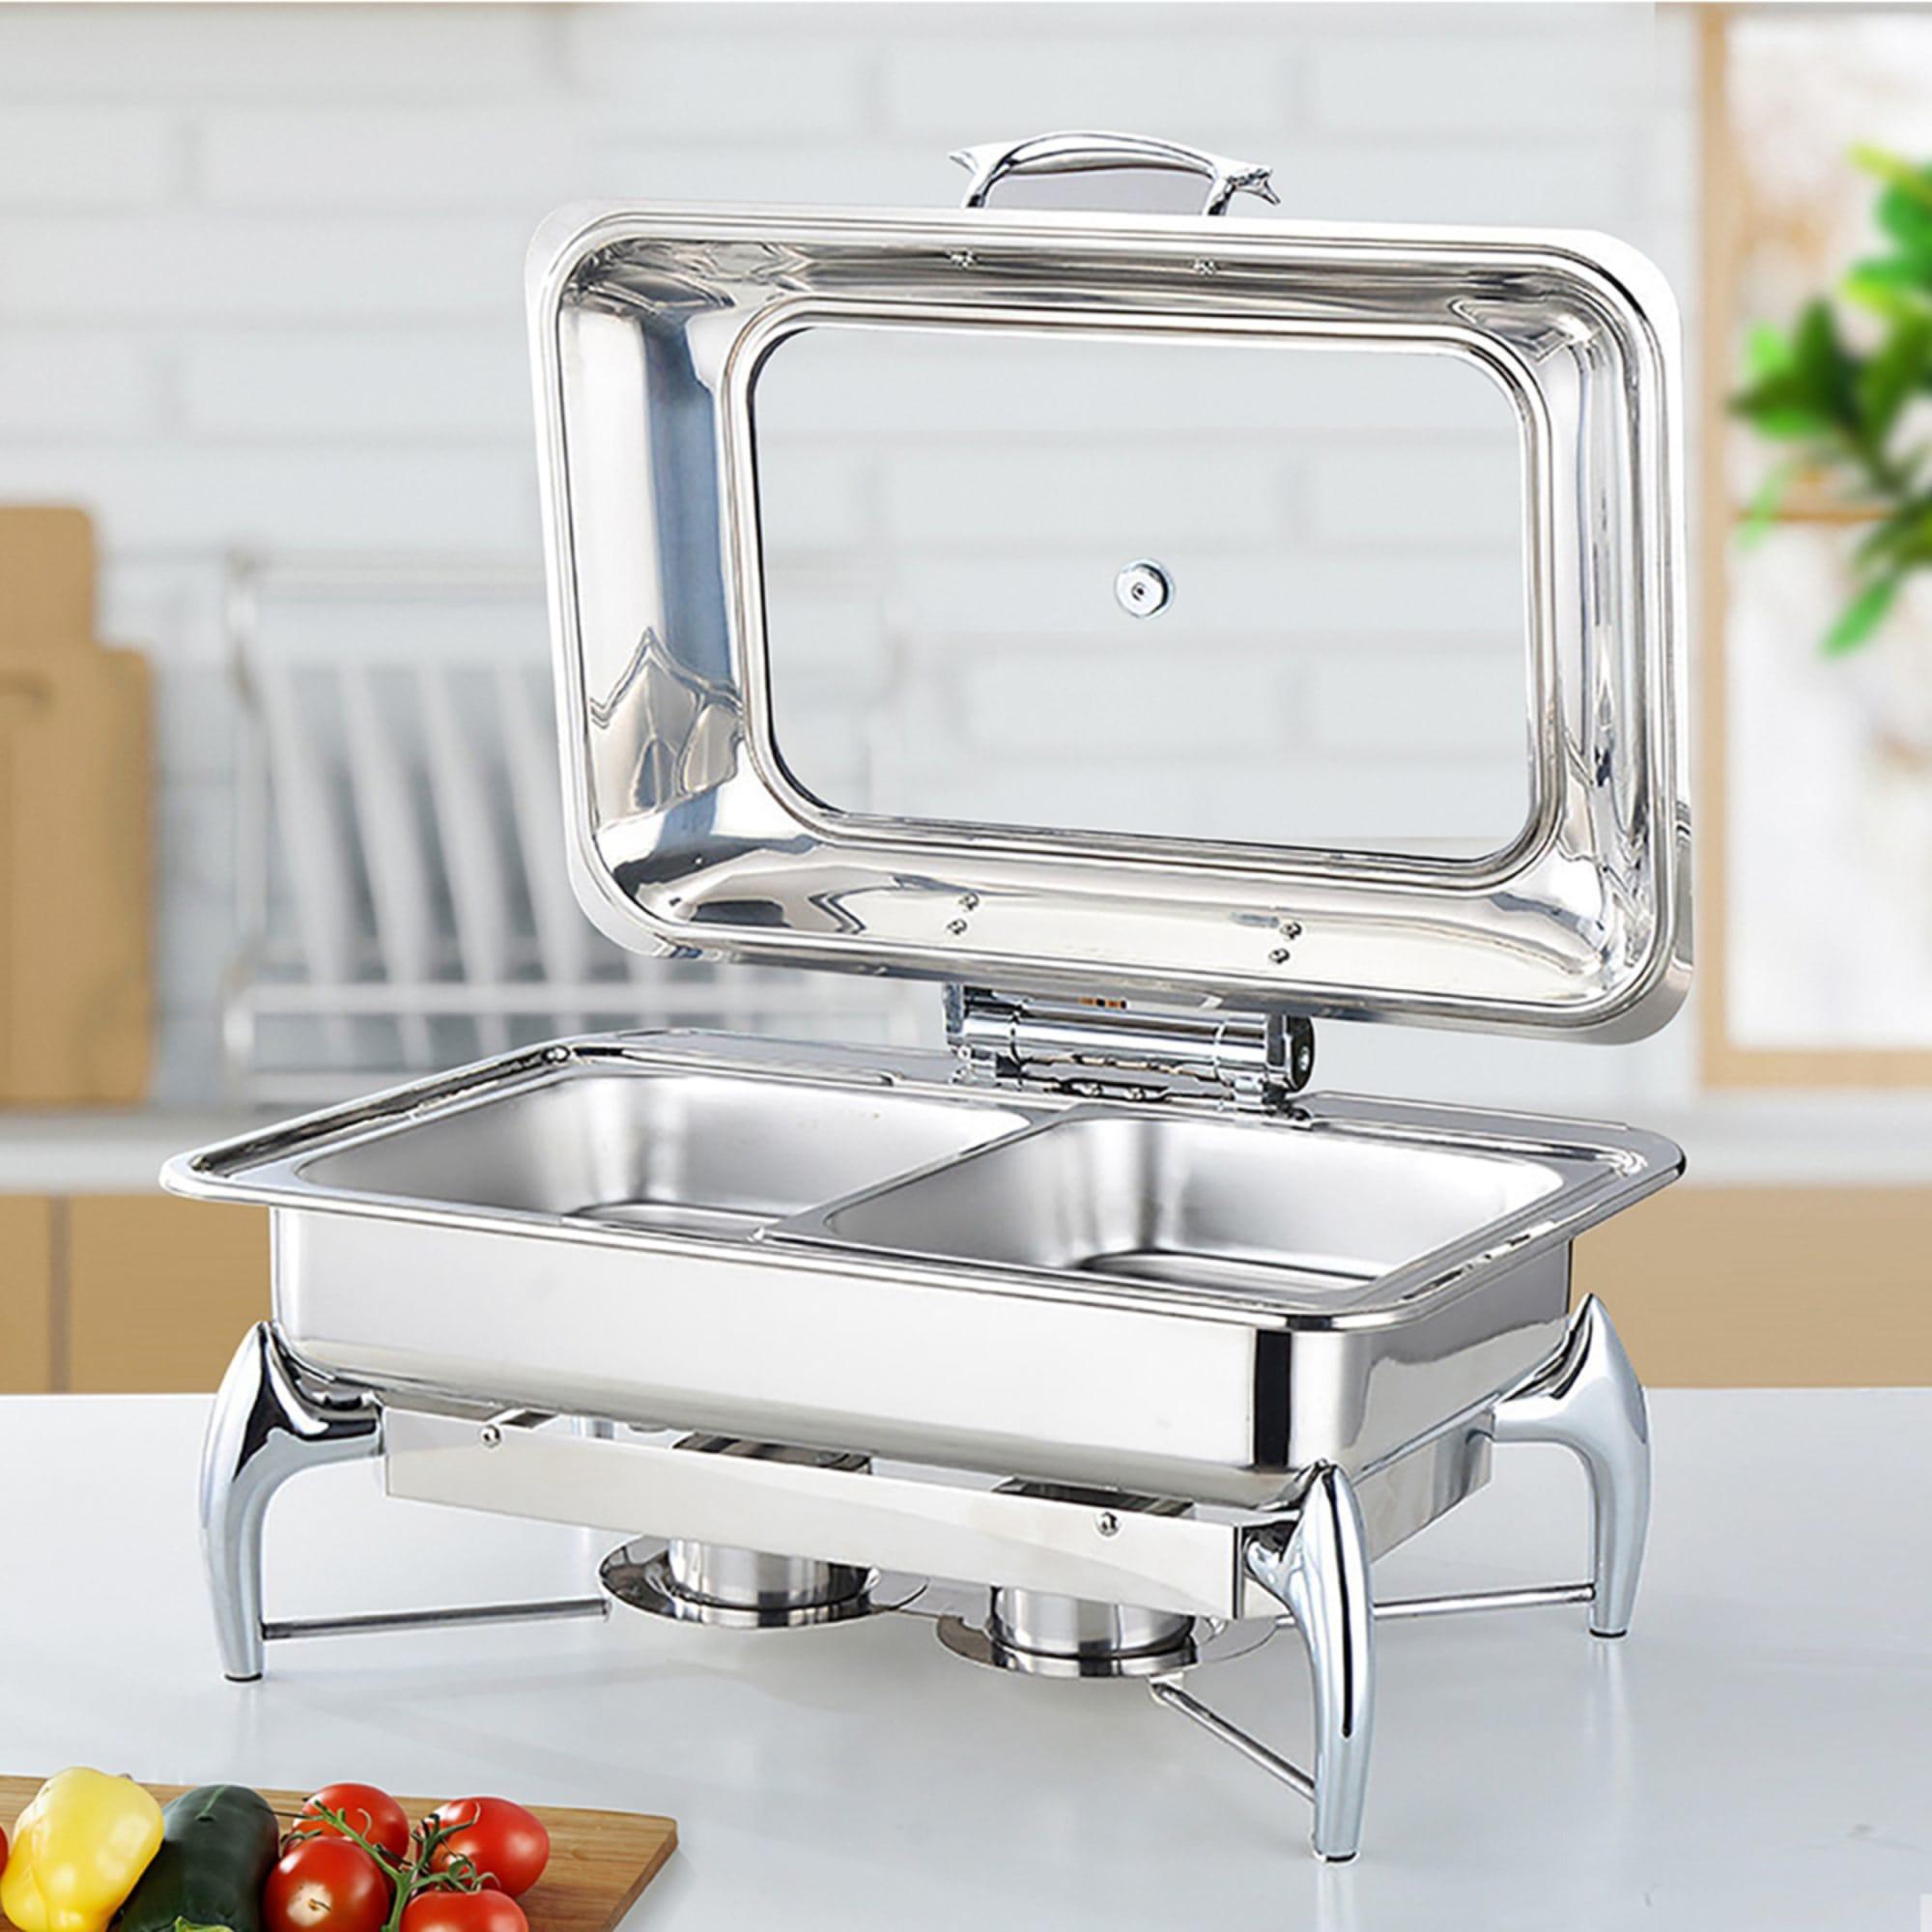 Soga Rectangular Stainless Steel Chafing Dish with Top Lid Image 4